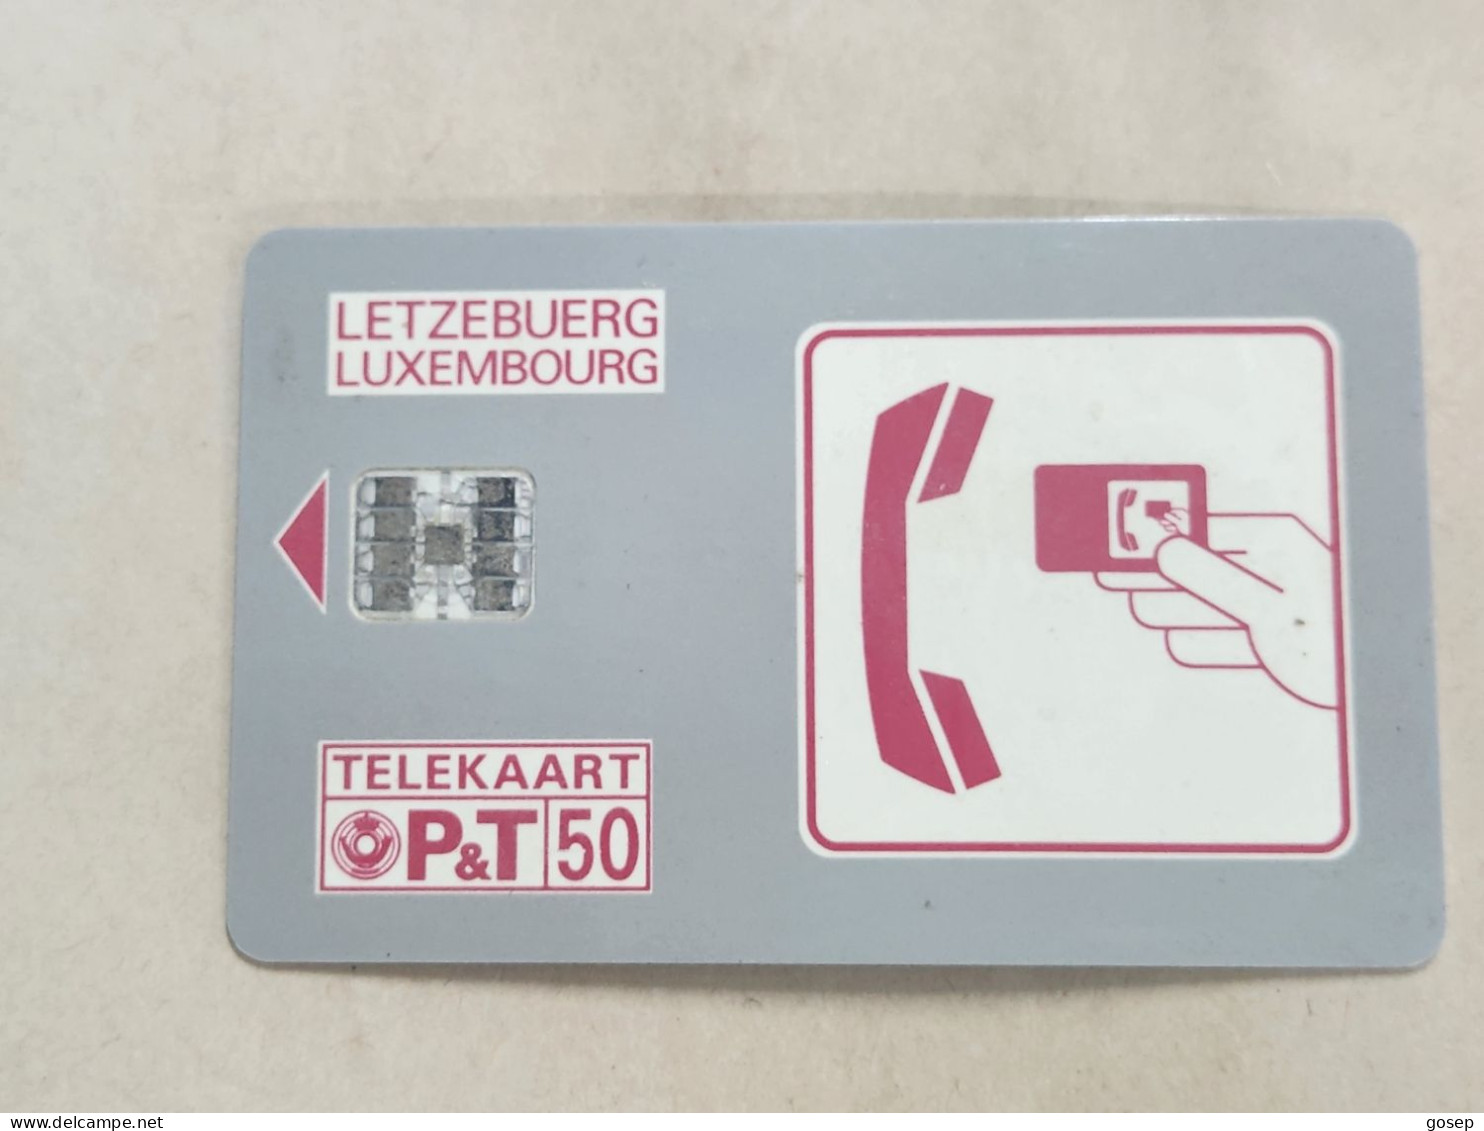 LUXEMBOURG-(SC01_D)-SERVICE 0800-(30)-(C42144137)-(50units)-(1.7.91)(tirage-180.000)-used Card - Luxemburg